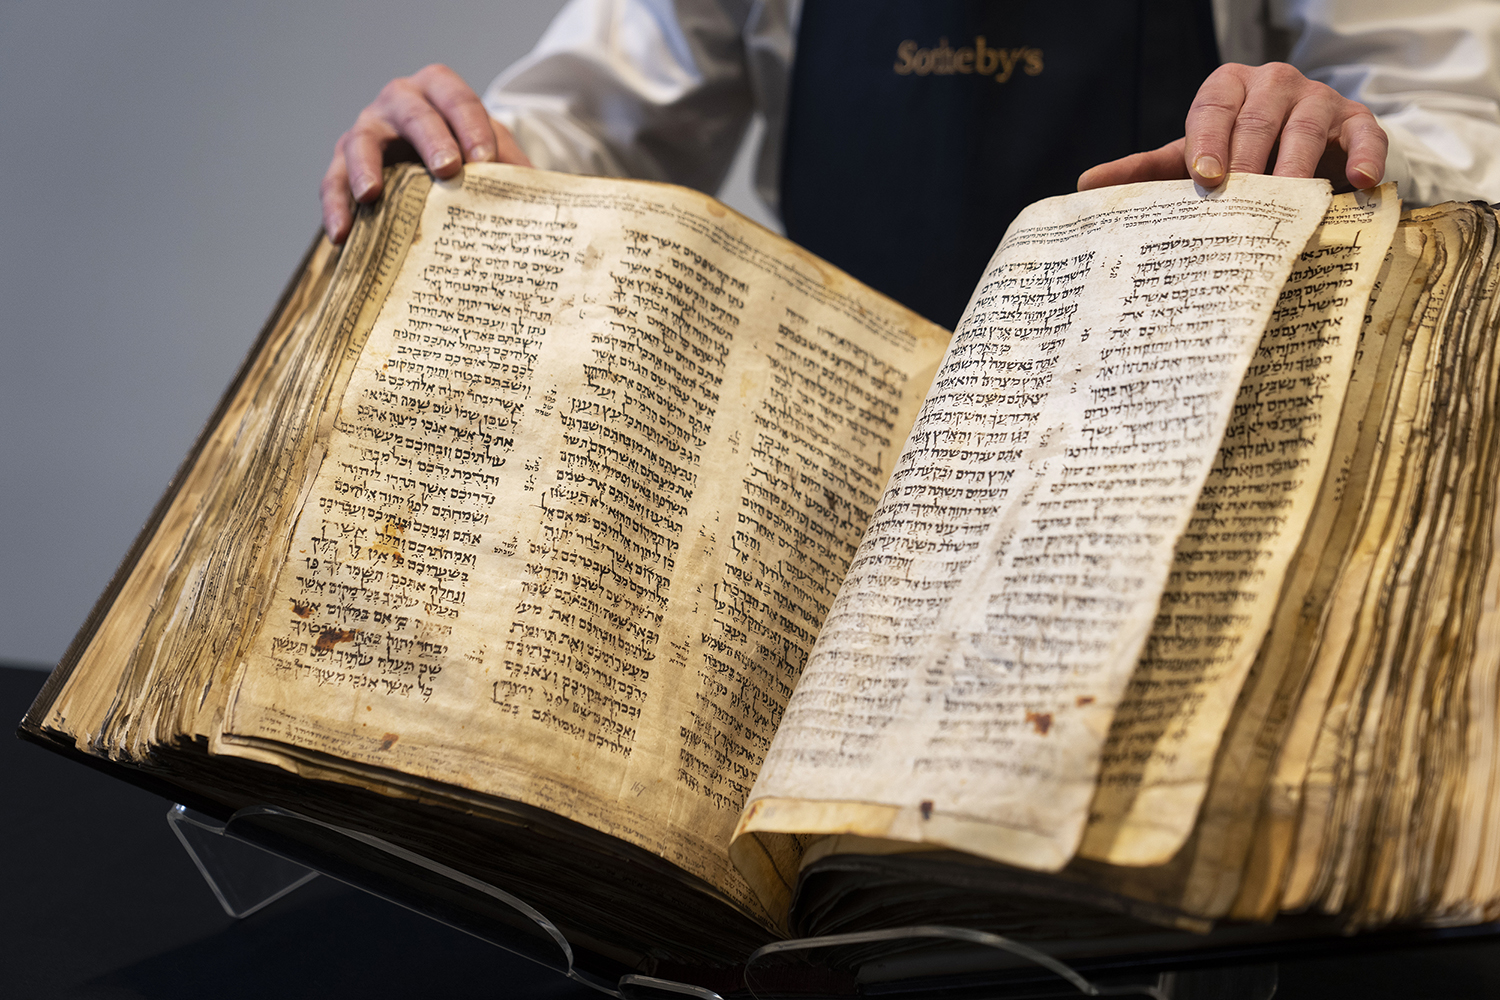 Sotheby's unveils the Codex Sassoon for auction, Wednesday, Feb. 15, 2023, in the Manhattan borough of New York. The auction house is billing the lot as the "earliest, most complete Hebrew Bible ever discovered." (AP Photo/John Minchillo)